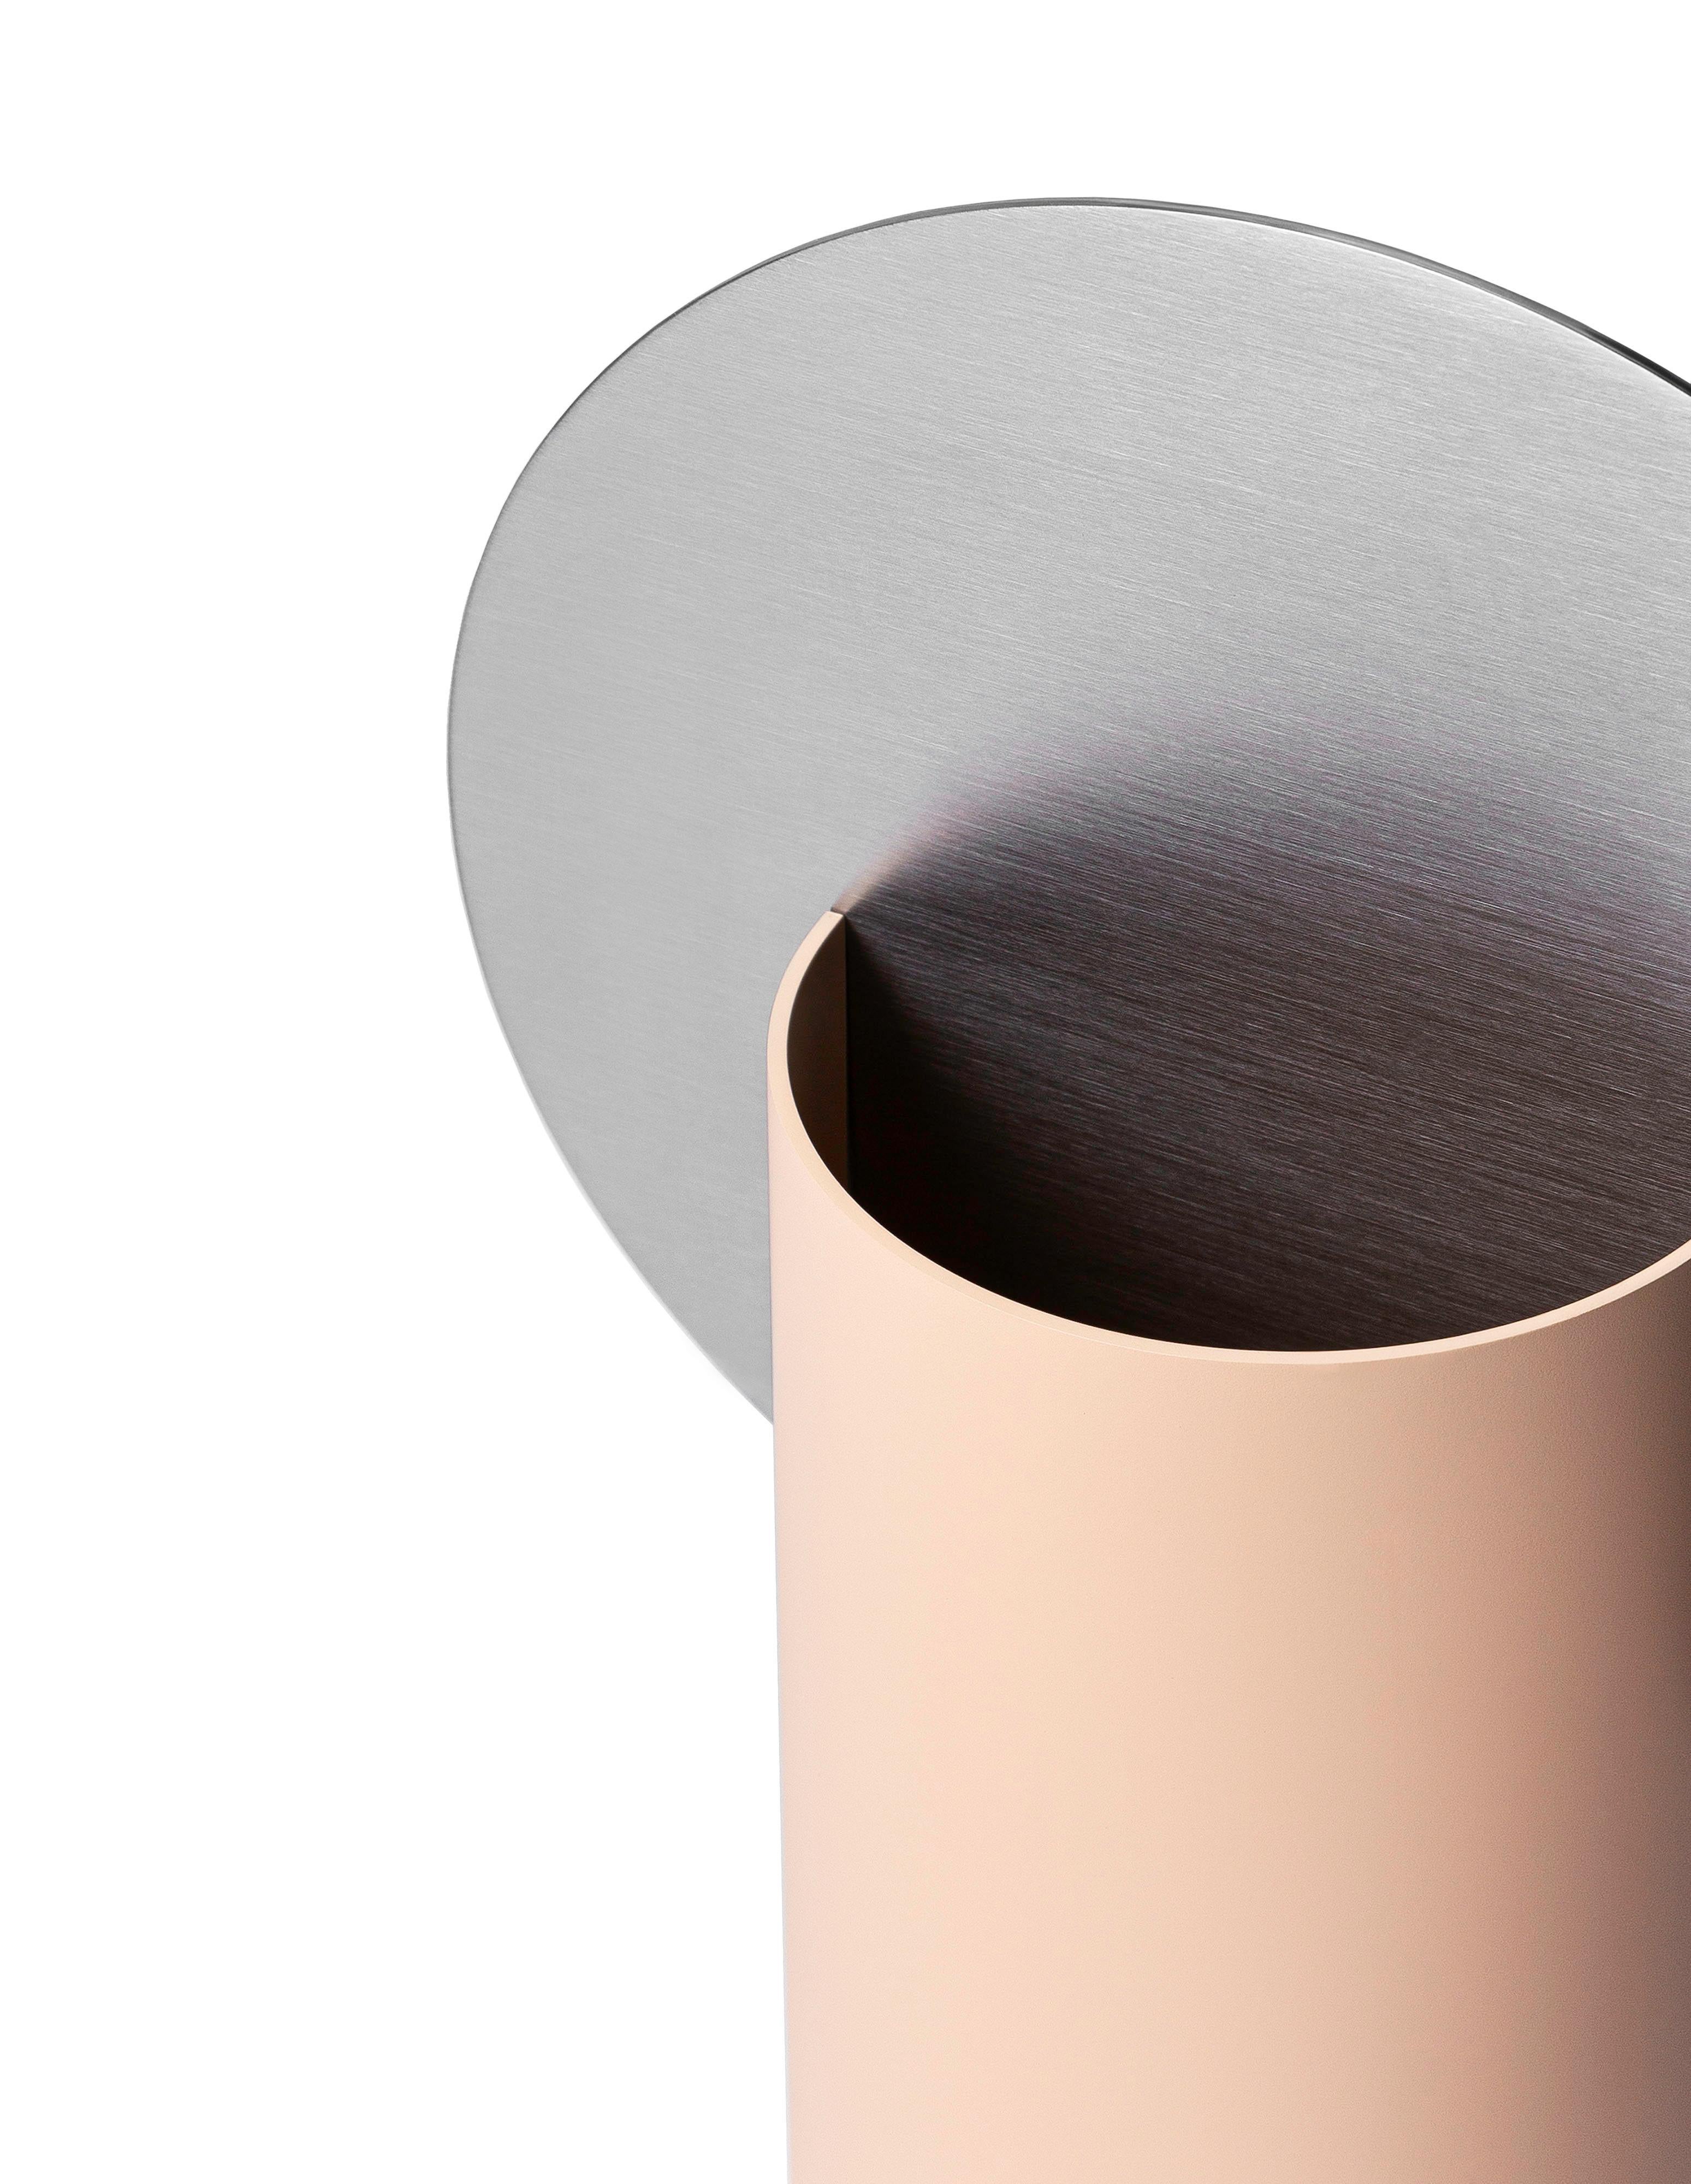 Ukrainian Modern Malevich Vase CS8 by Noom with Brushed Stainless Steel